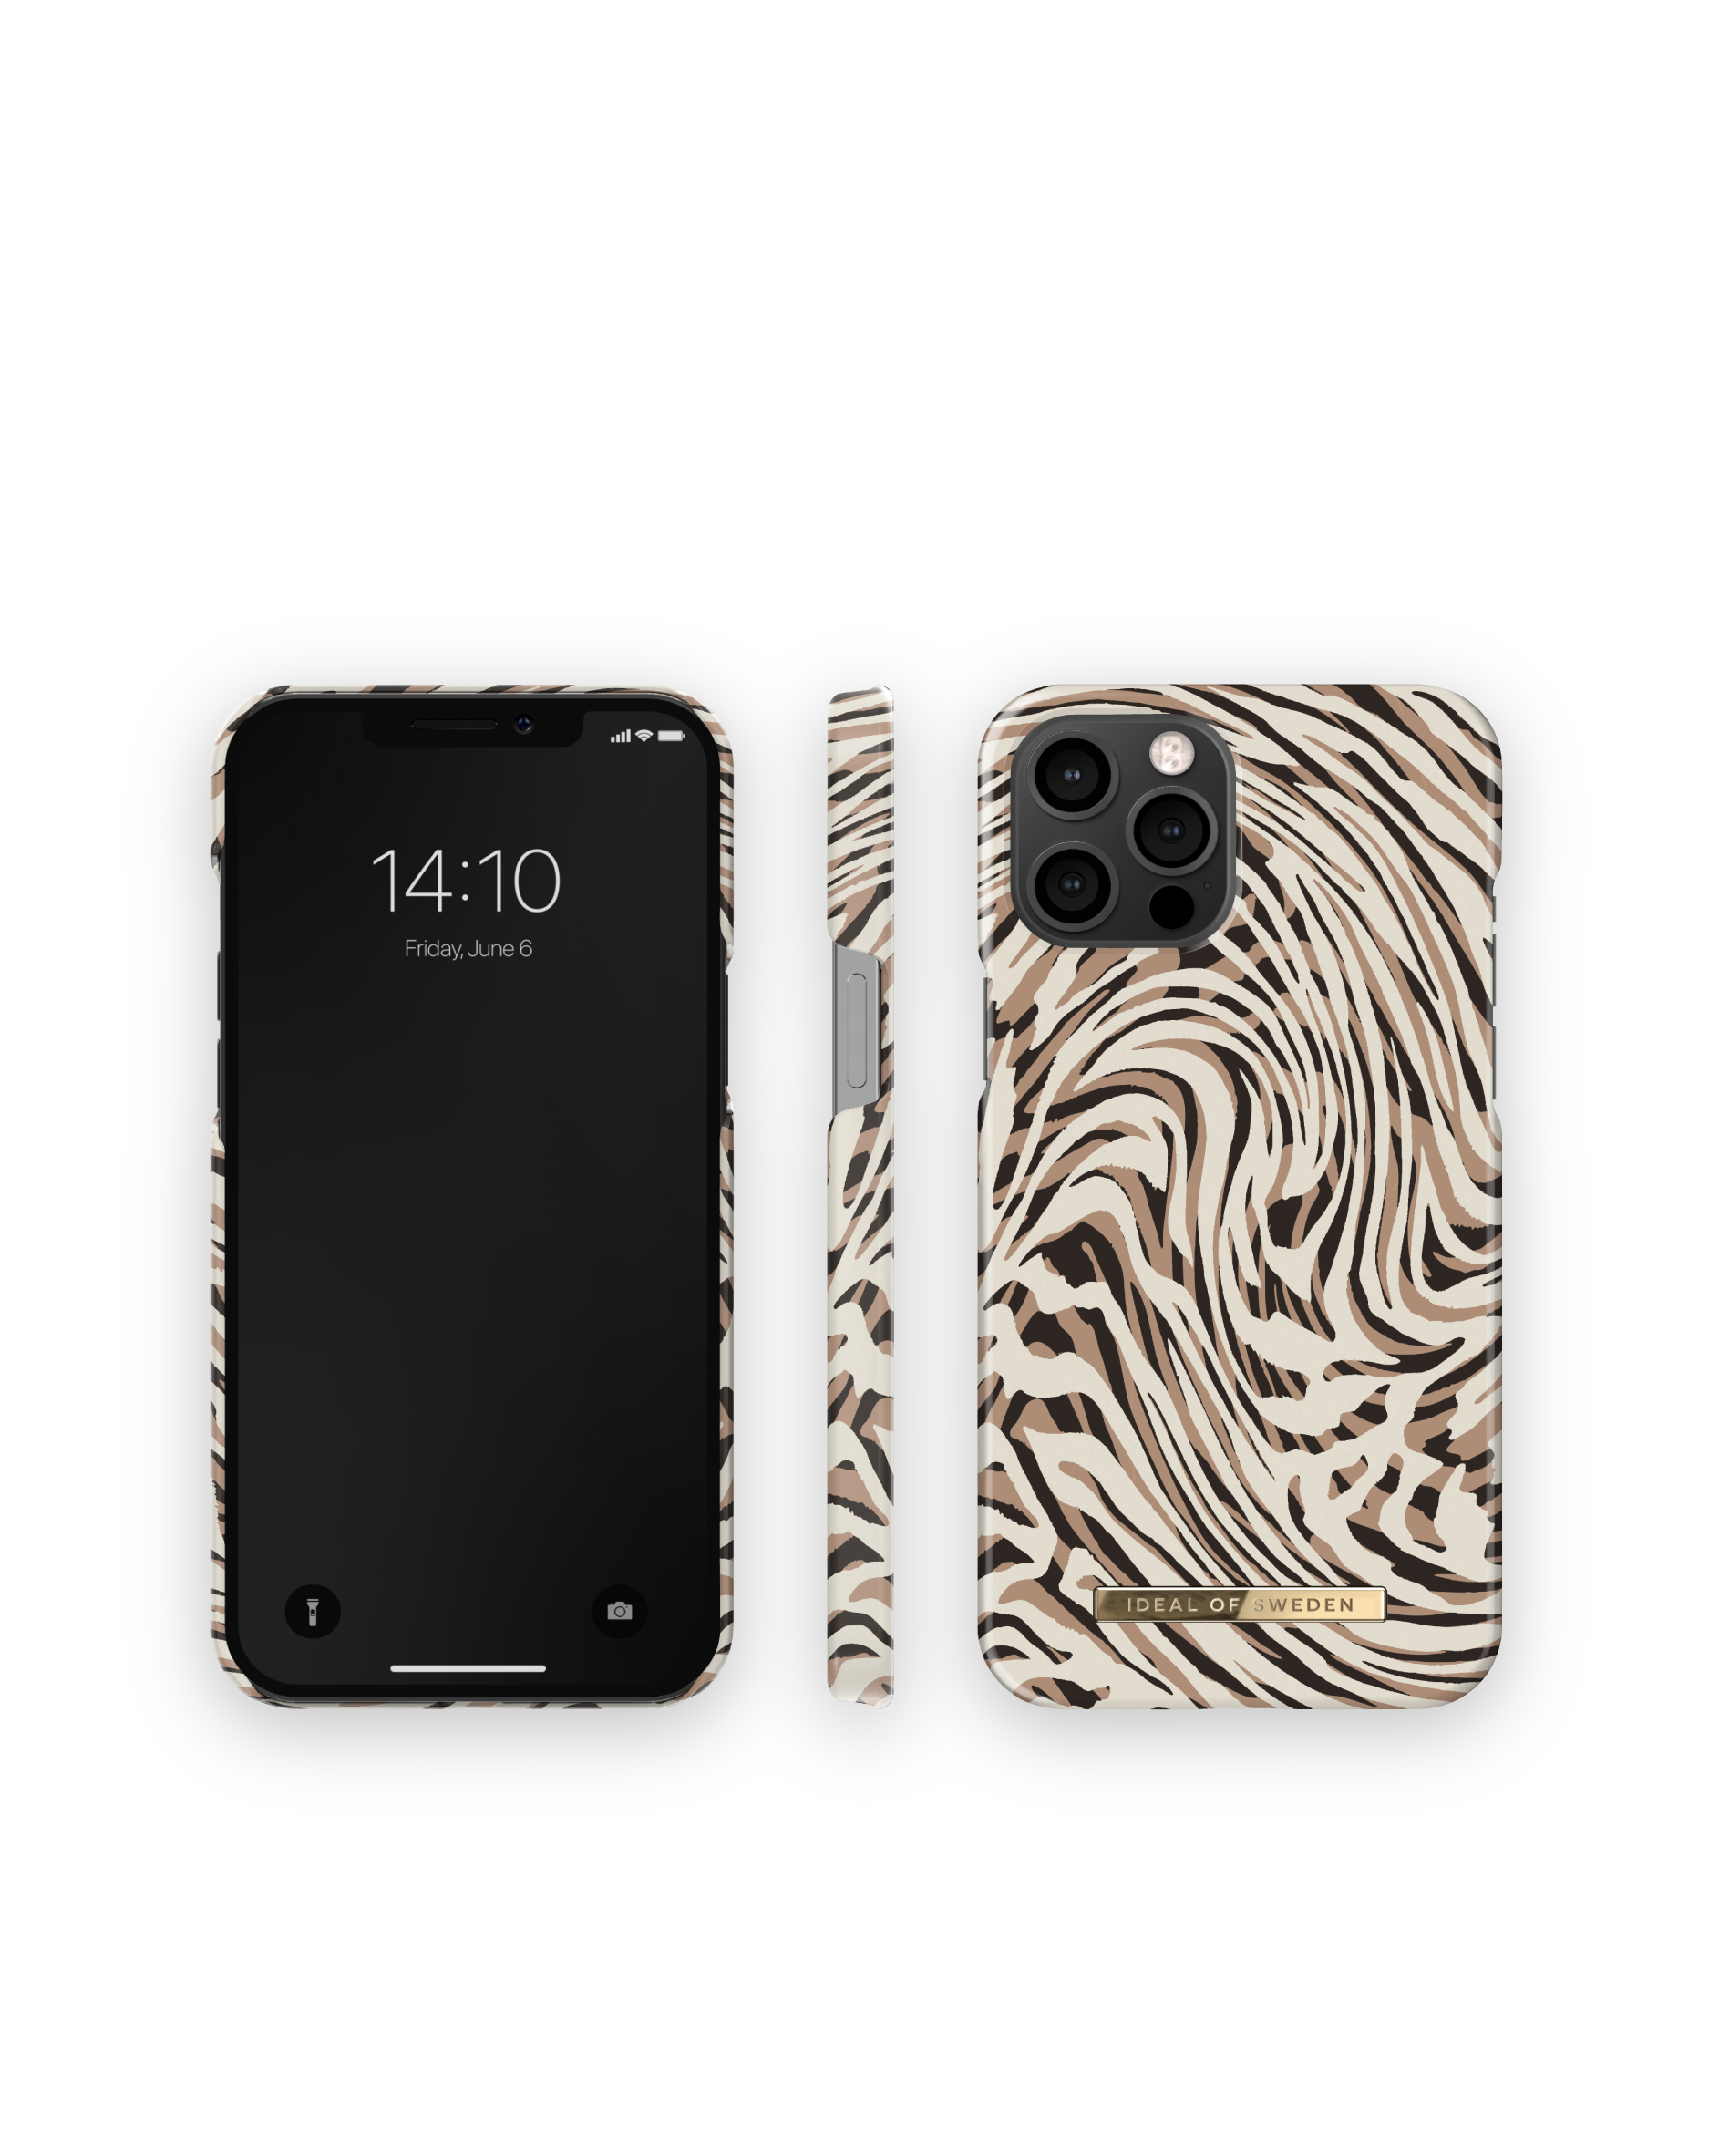 IDEAL OF SWEDEN IDFCSS22-I2067-392, Backcover, Hypnotic Zebra Pro Apple, Max, 12 iPhone